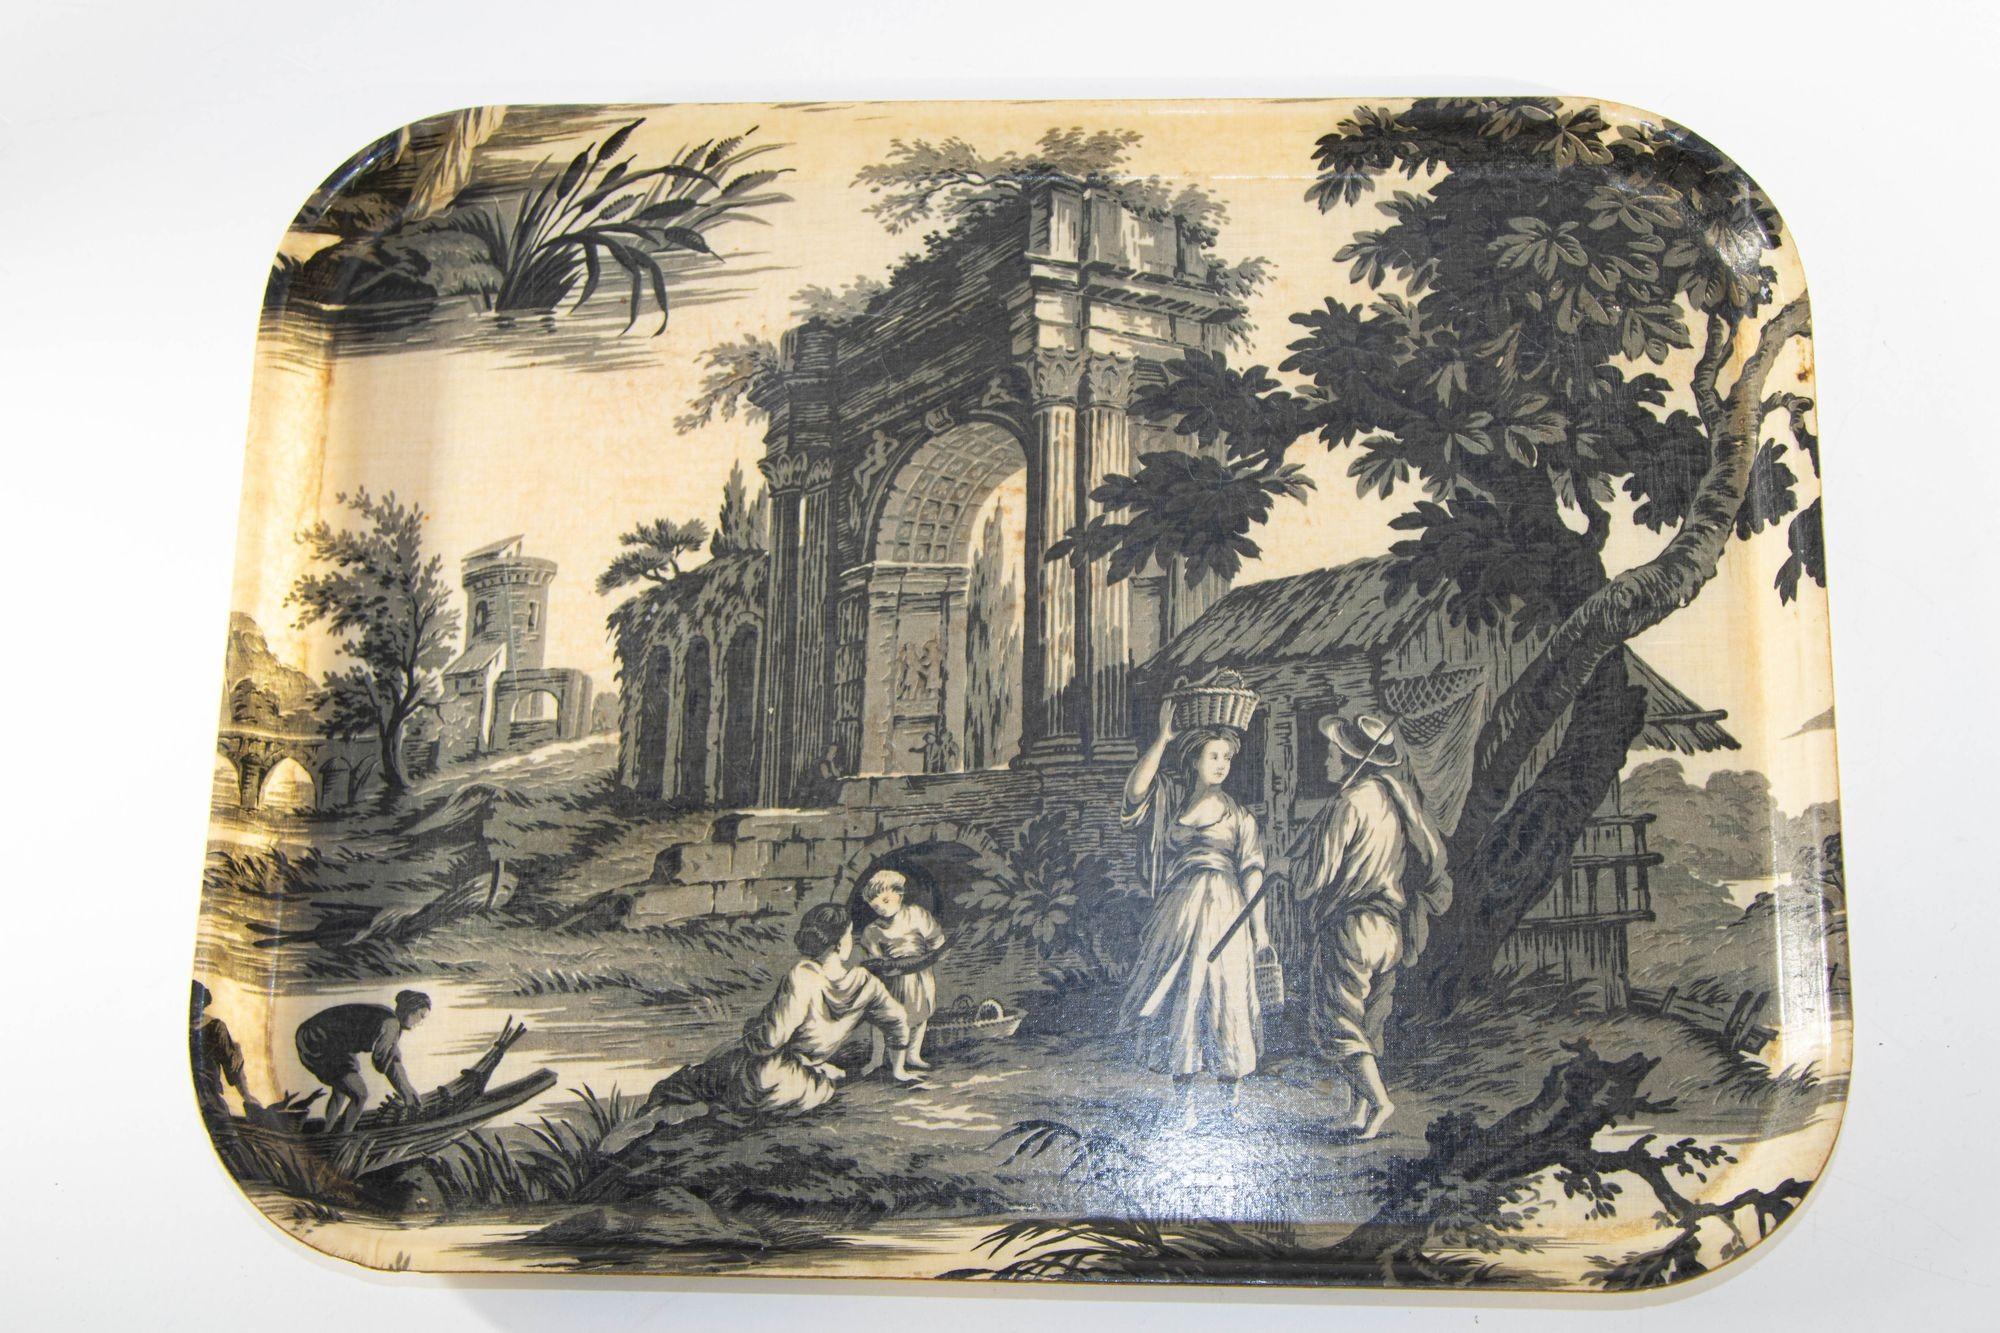 Vintage Large French Toile Pattern Fiberglass Tray with 19th Century Countryside For Sale 4